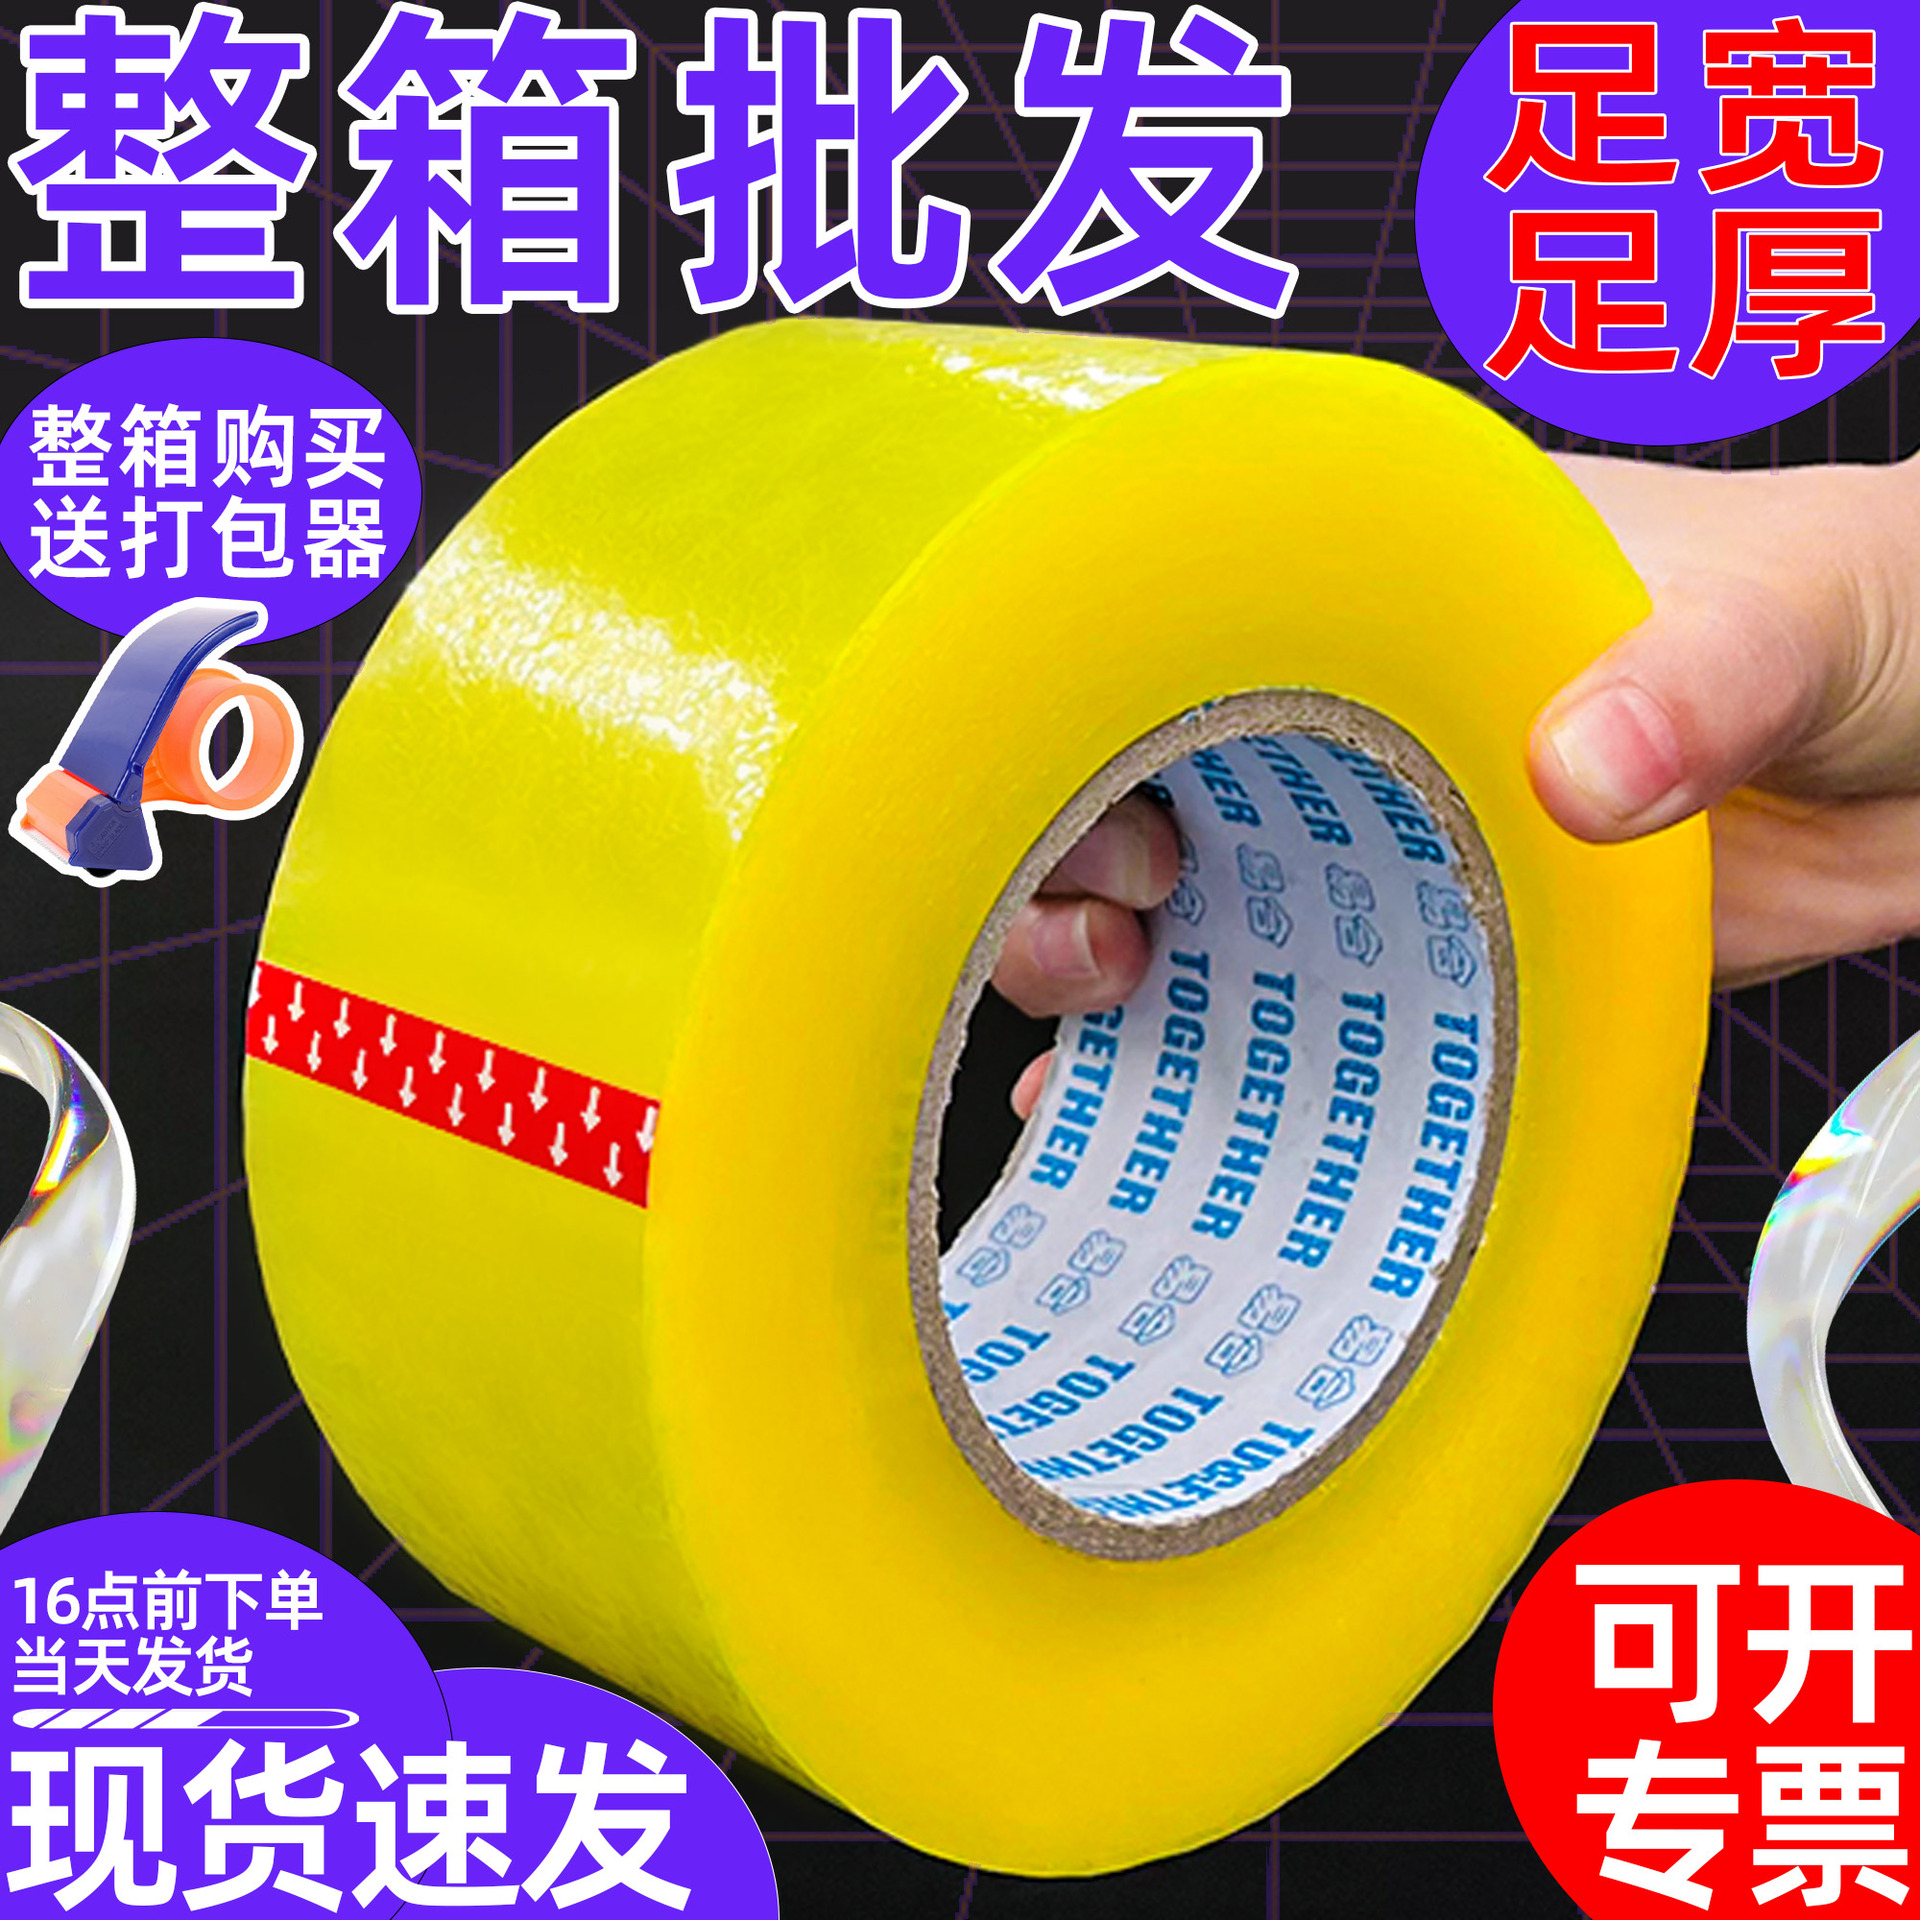 Full Box of Transparent Tape Wholesale Express Sealing Yellow Tape Sealing Packaging Beige Packaging Tape in Stock